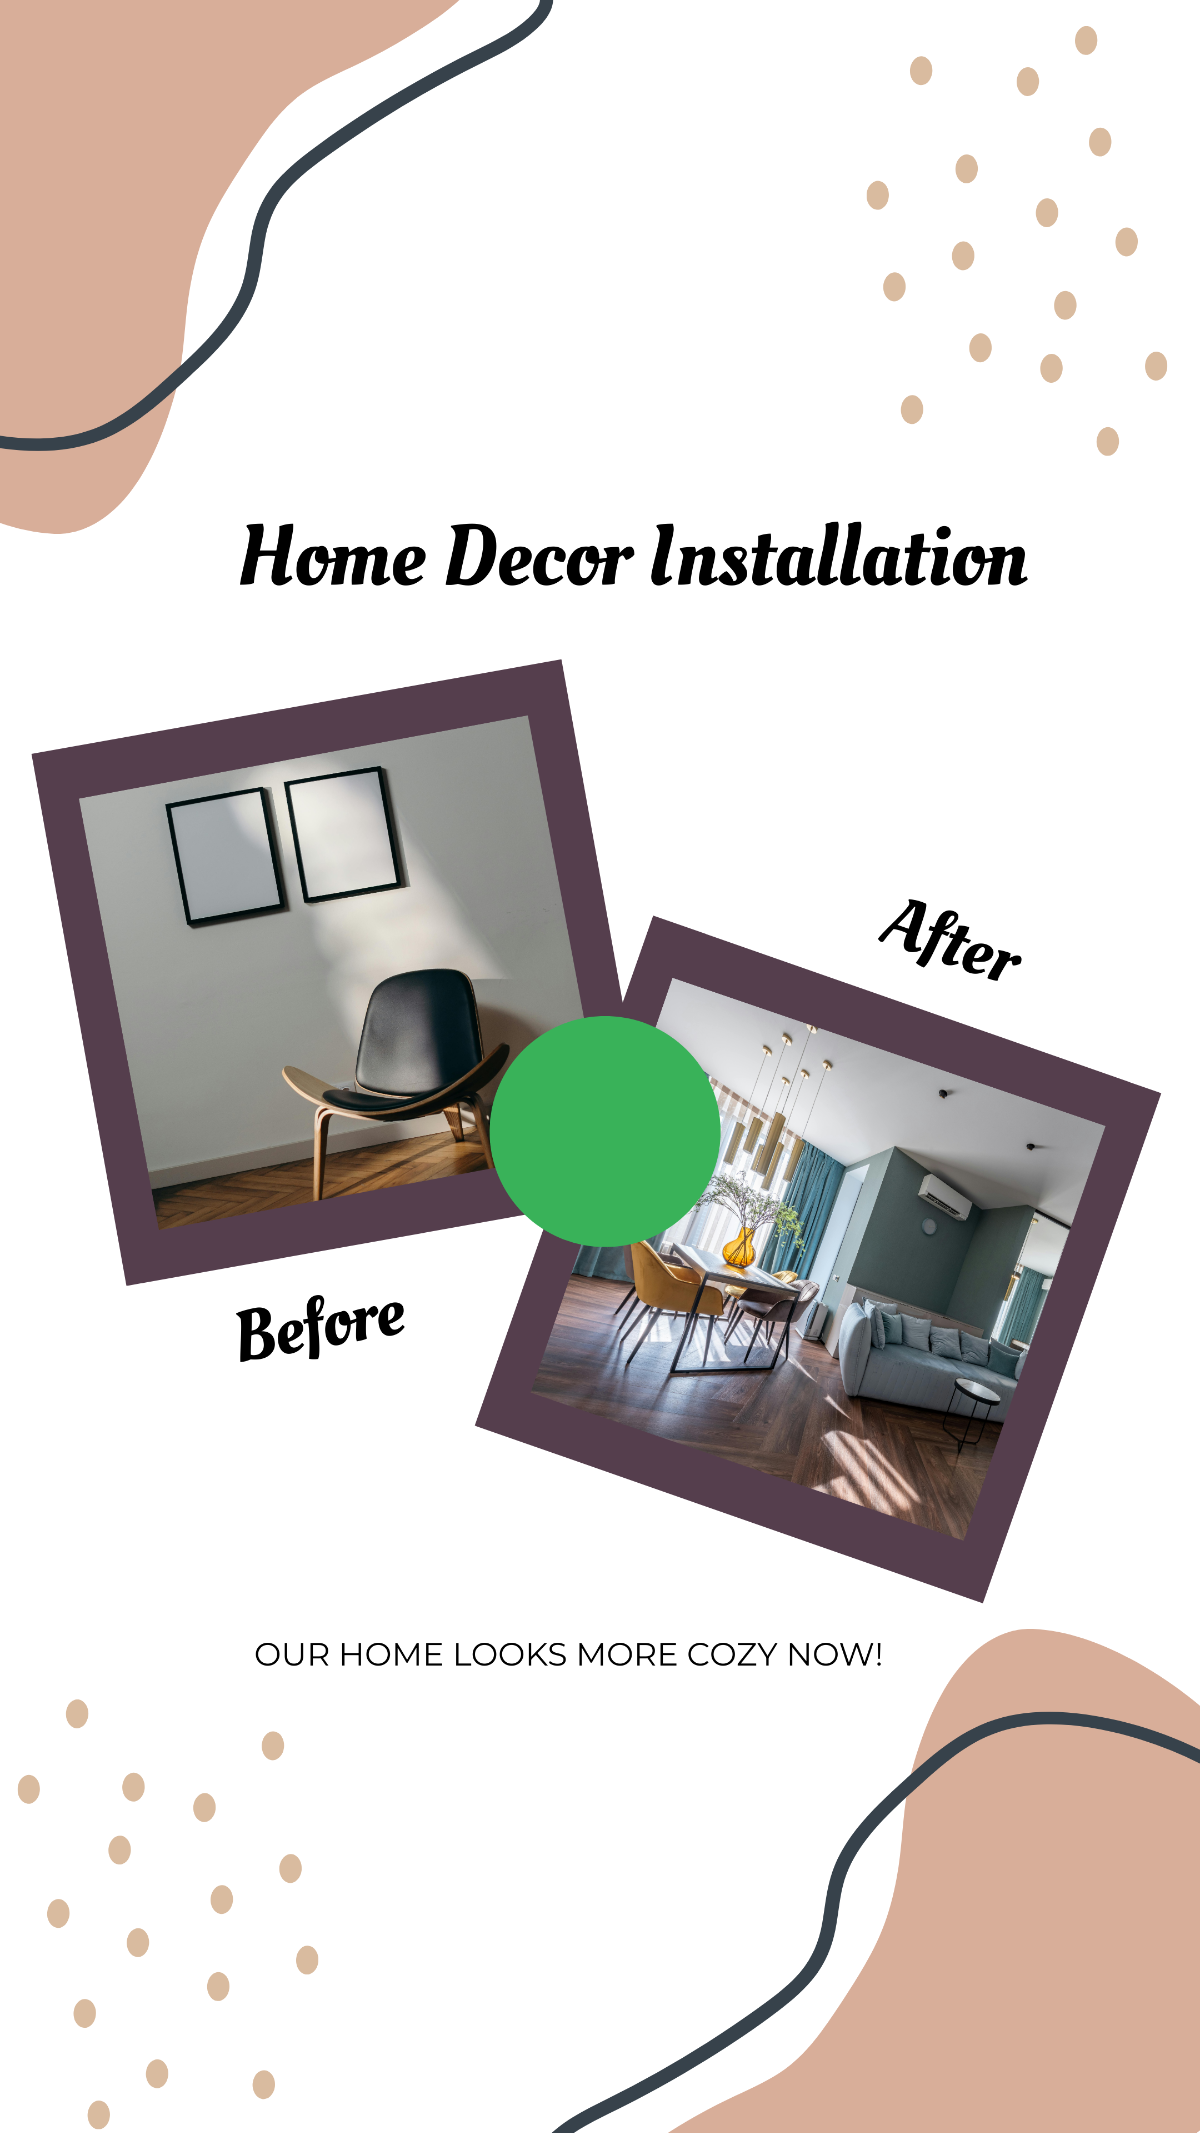 Free Home Decor Before and After X Post Template